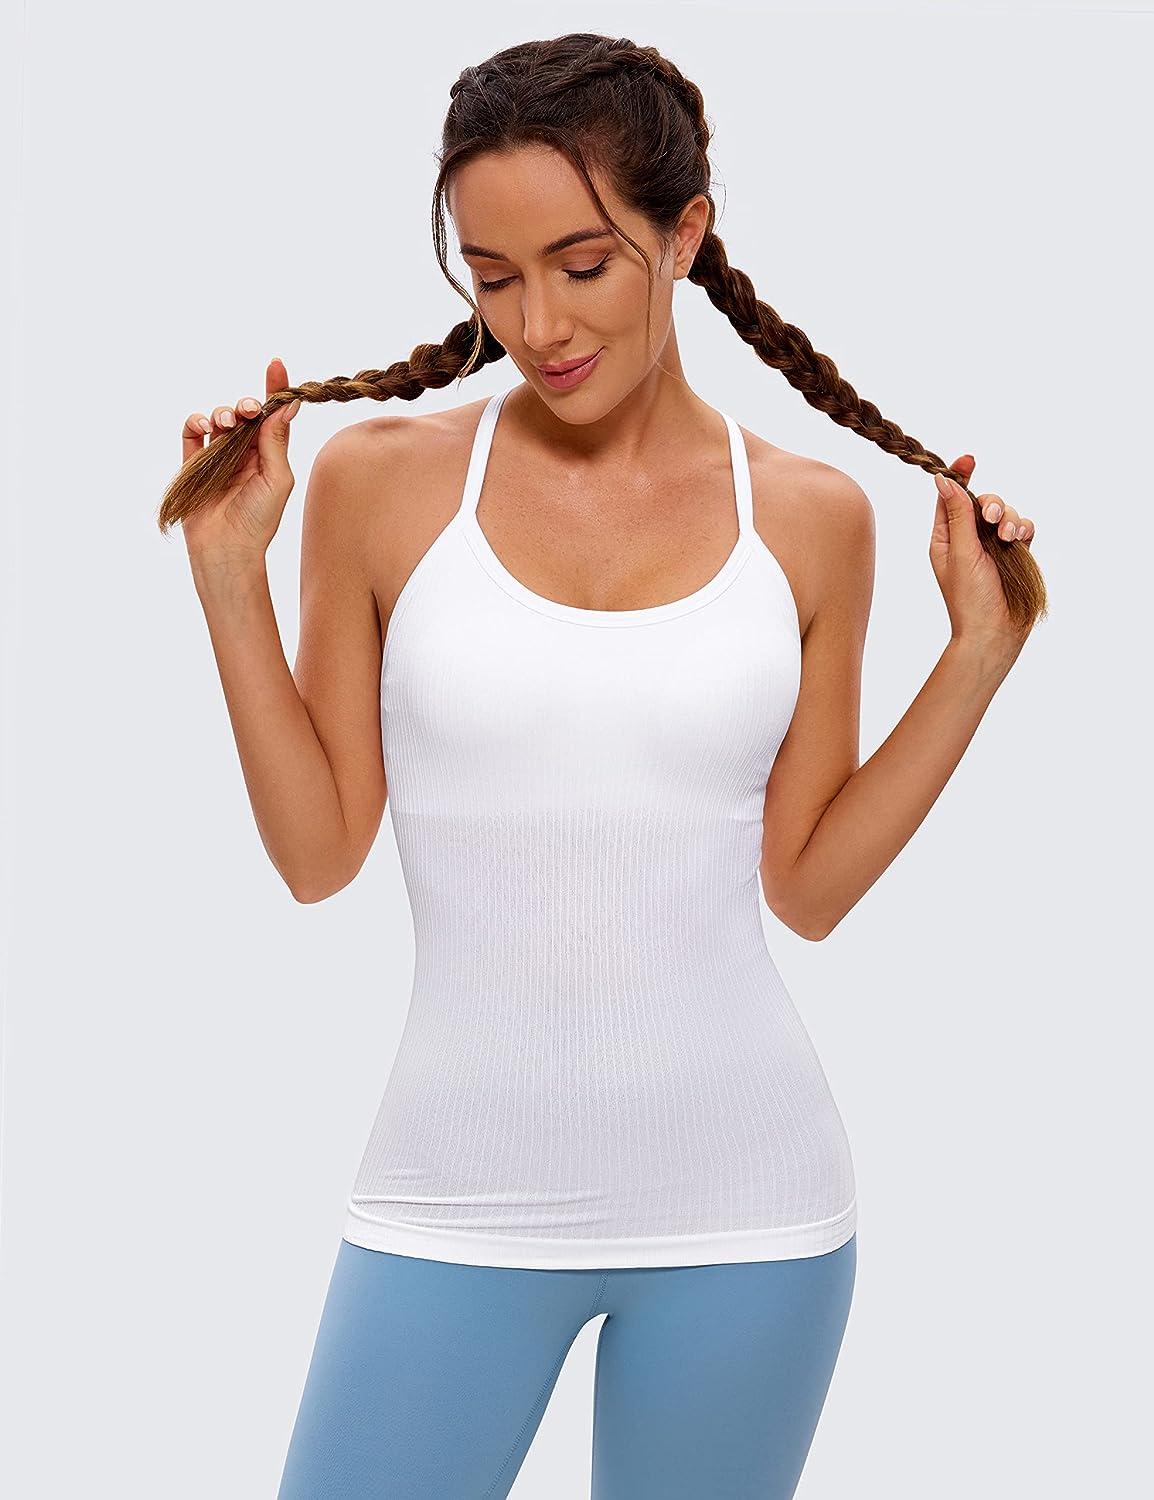 Womens Racerback Ribbed Tank Top Camisole with Built in Bra Running Yoga  Sport Bra Athletic Slim Sleeveless Summer Top